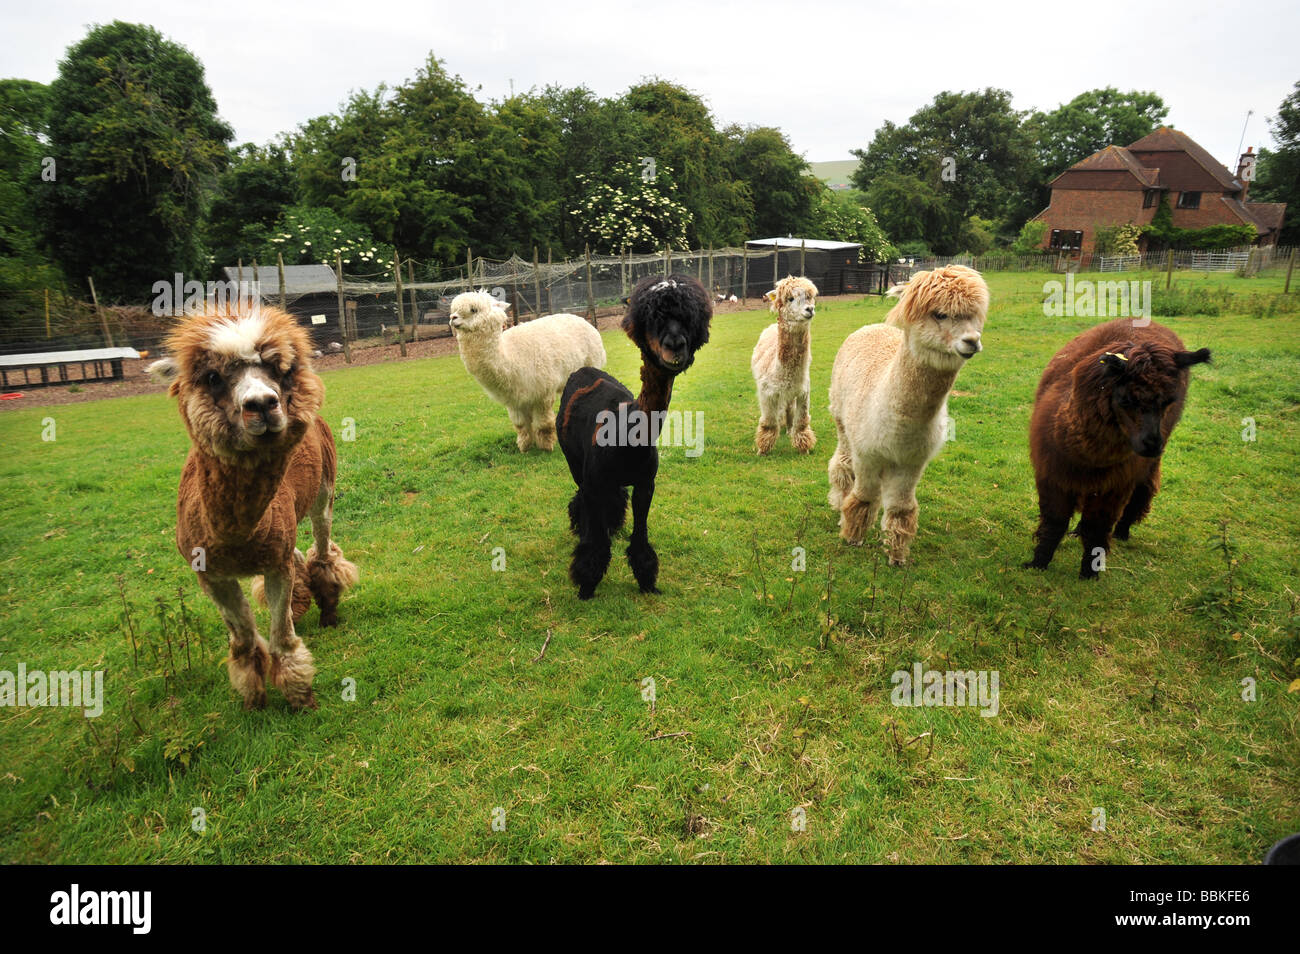 A group of Alpaca one of which has been shorn on a farm in Sussex Stock Photo